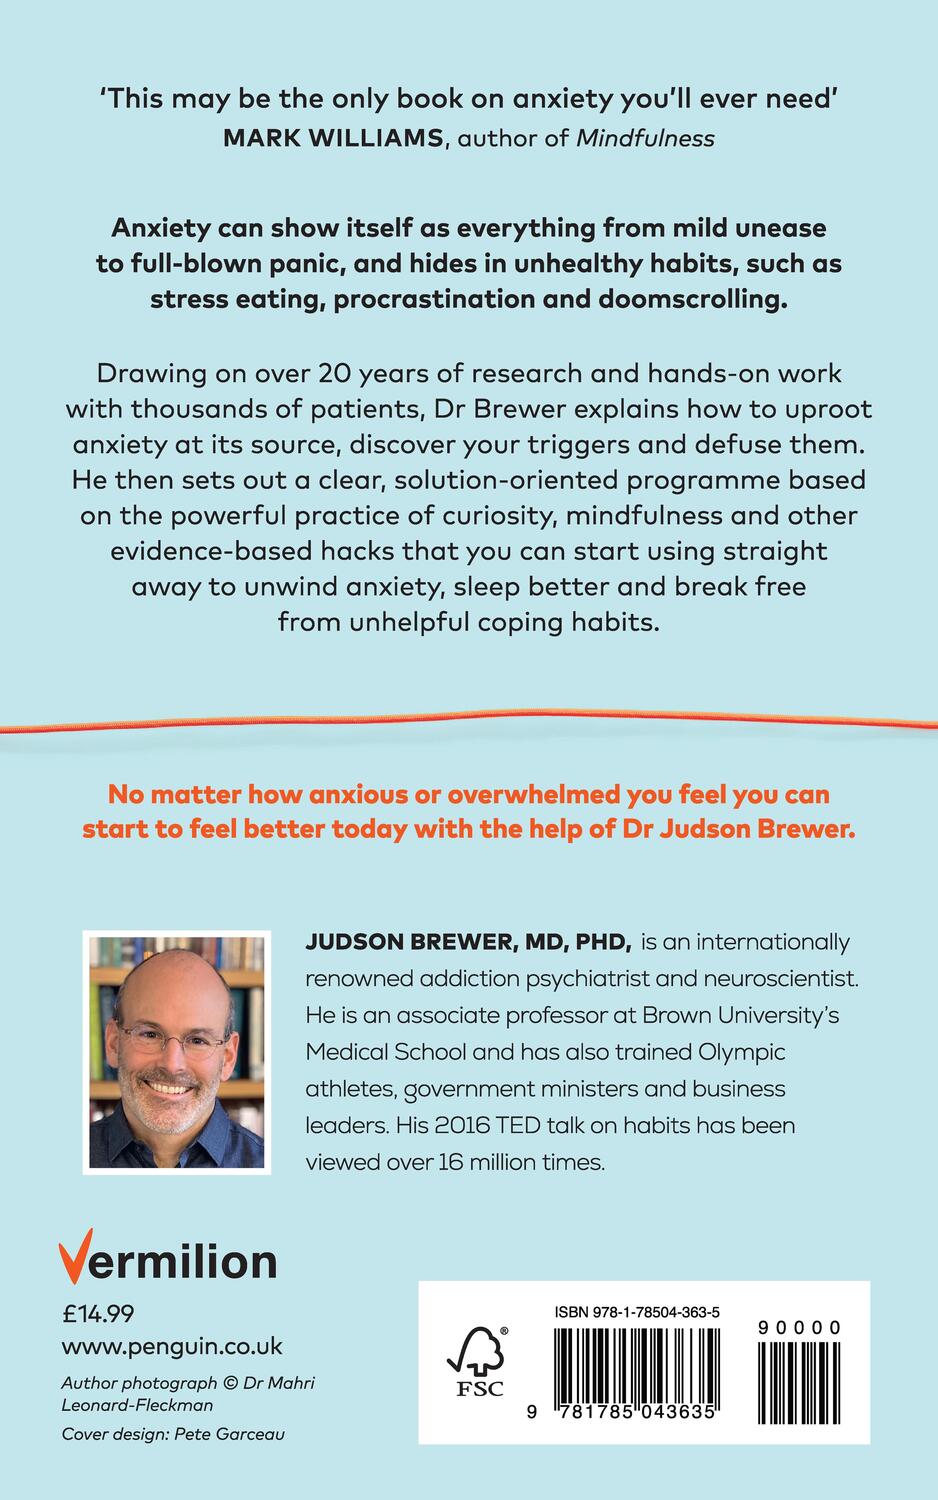 Rückseite: 9781785043635 | Unwinding Anxiety | Train Your Brain to Heal Your Mind | Judson Brewer